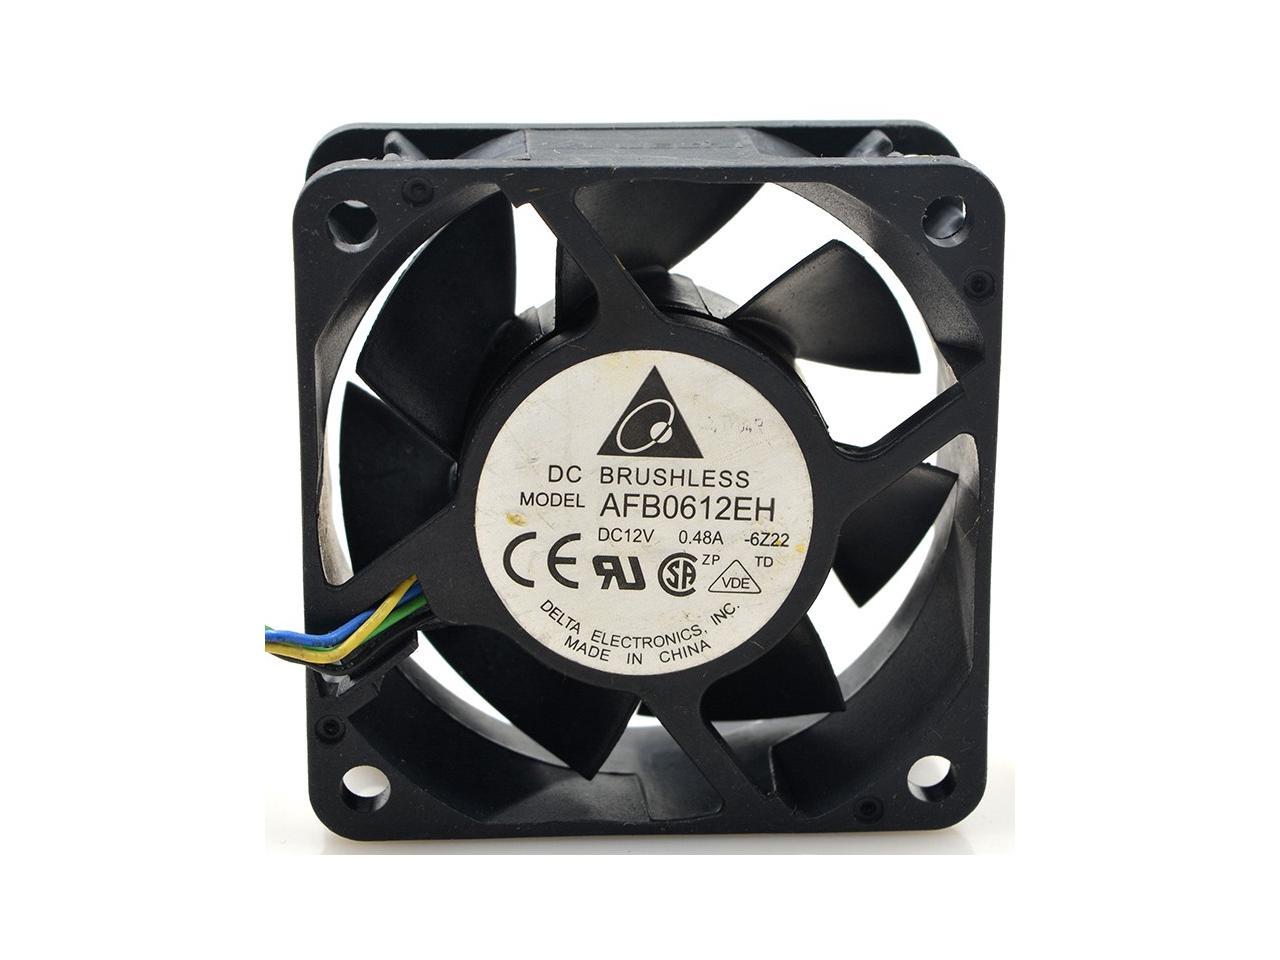 Delta AFB0612EH 12V 0.48A 6025 6cm 4-wire PWM chassis server fan